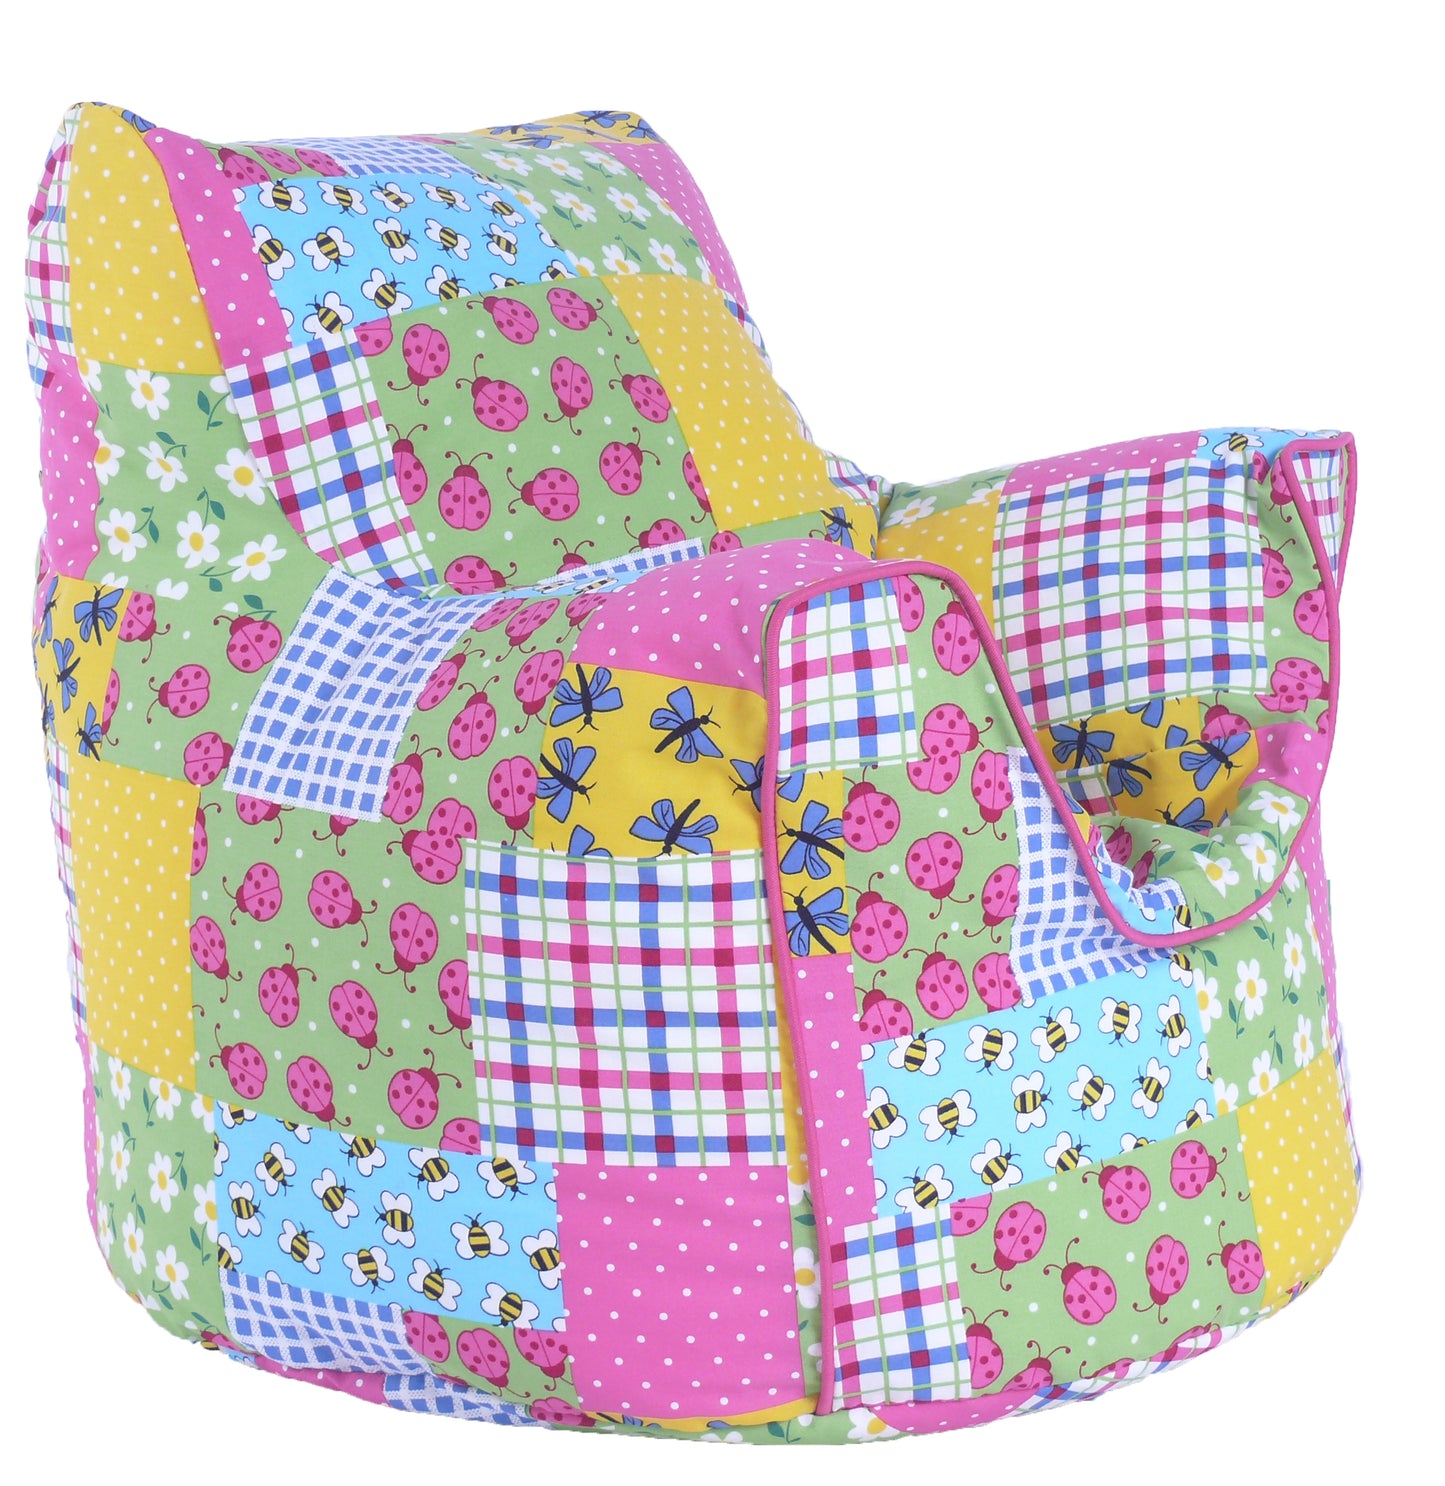 Cotton Patchwork Ladybird Bean Bag Arm Chair with Beans Child / Teen size